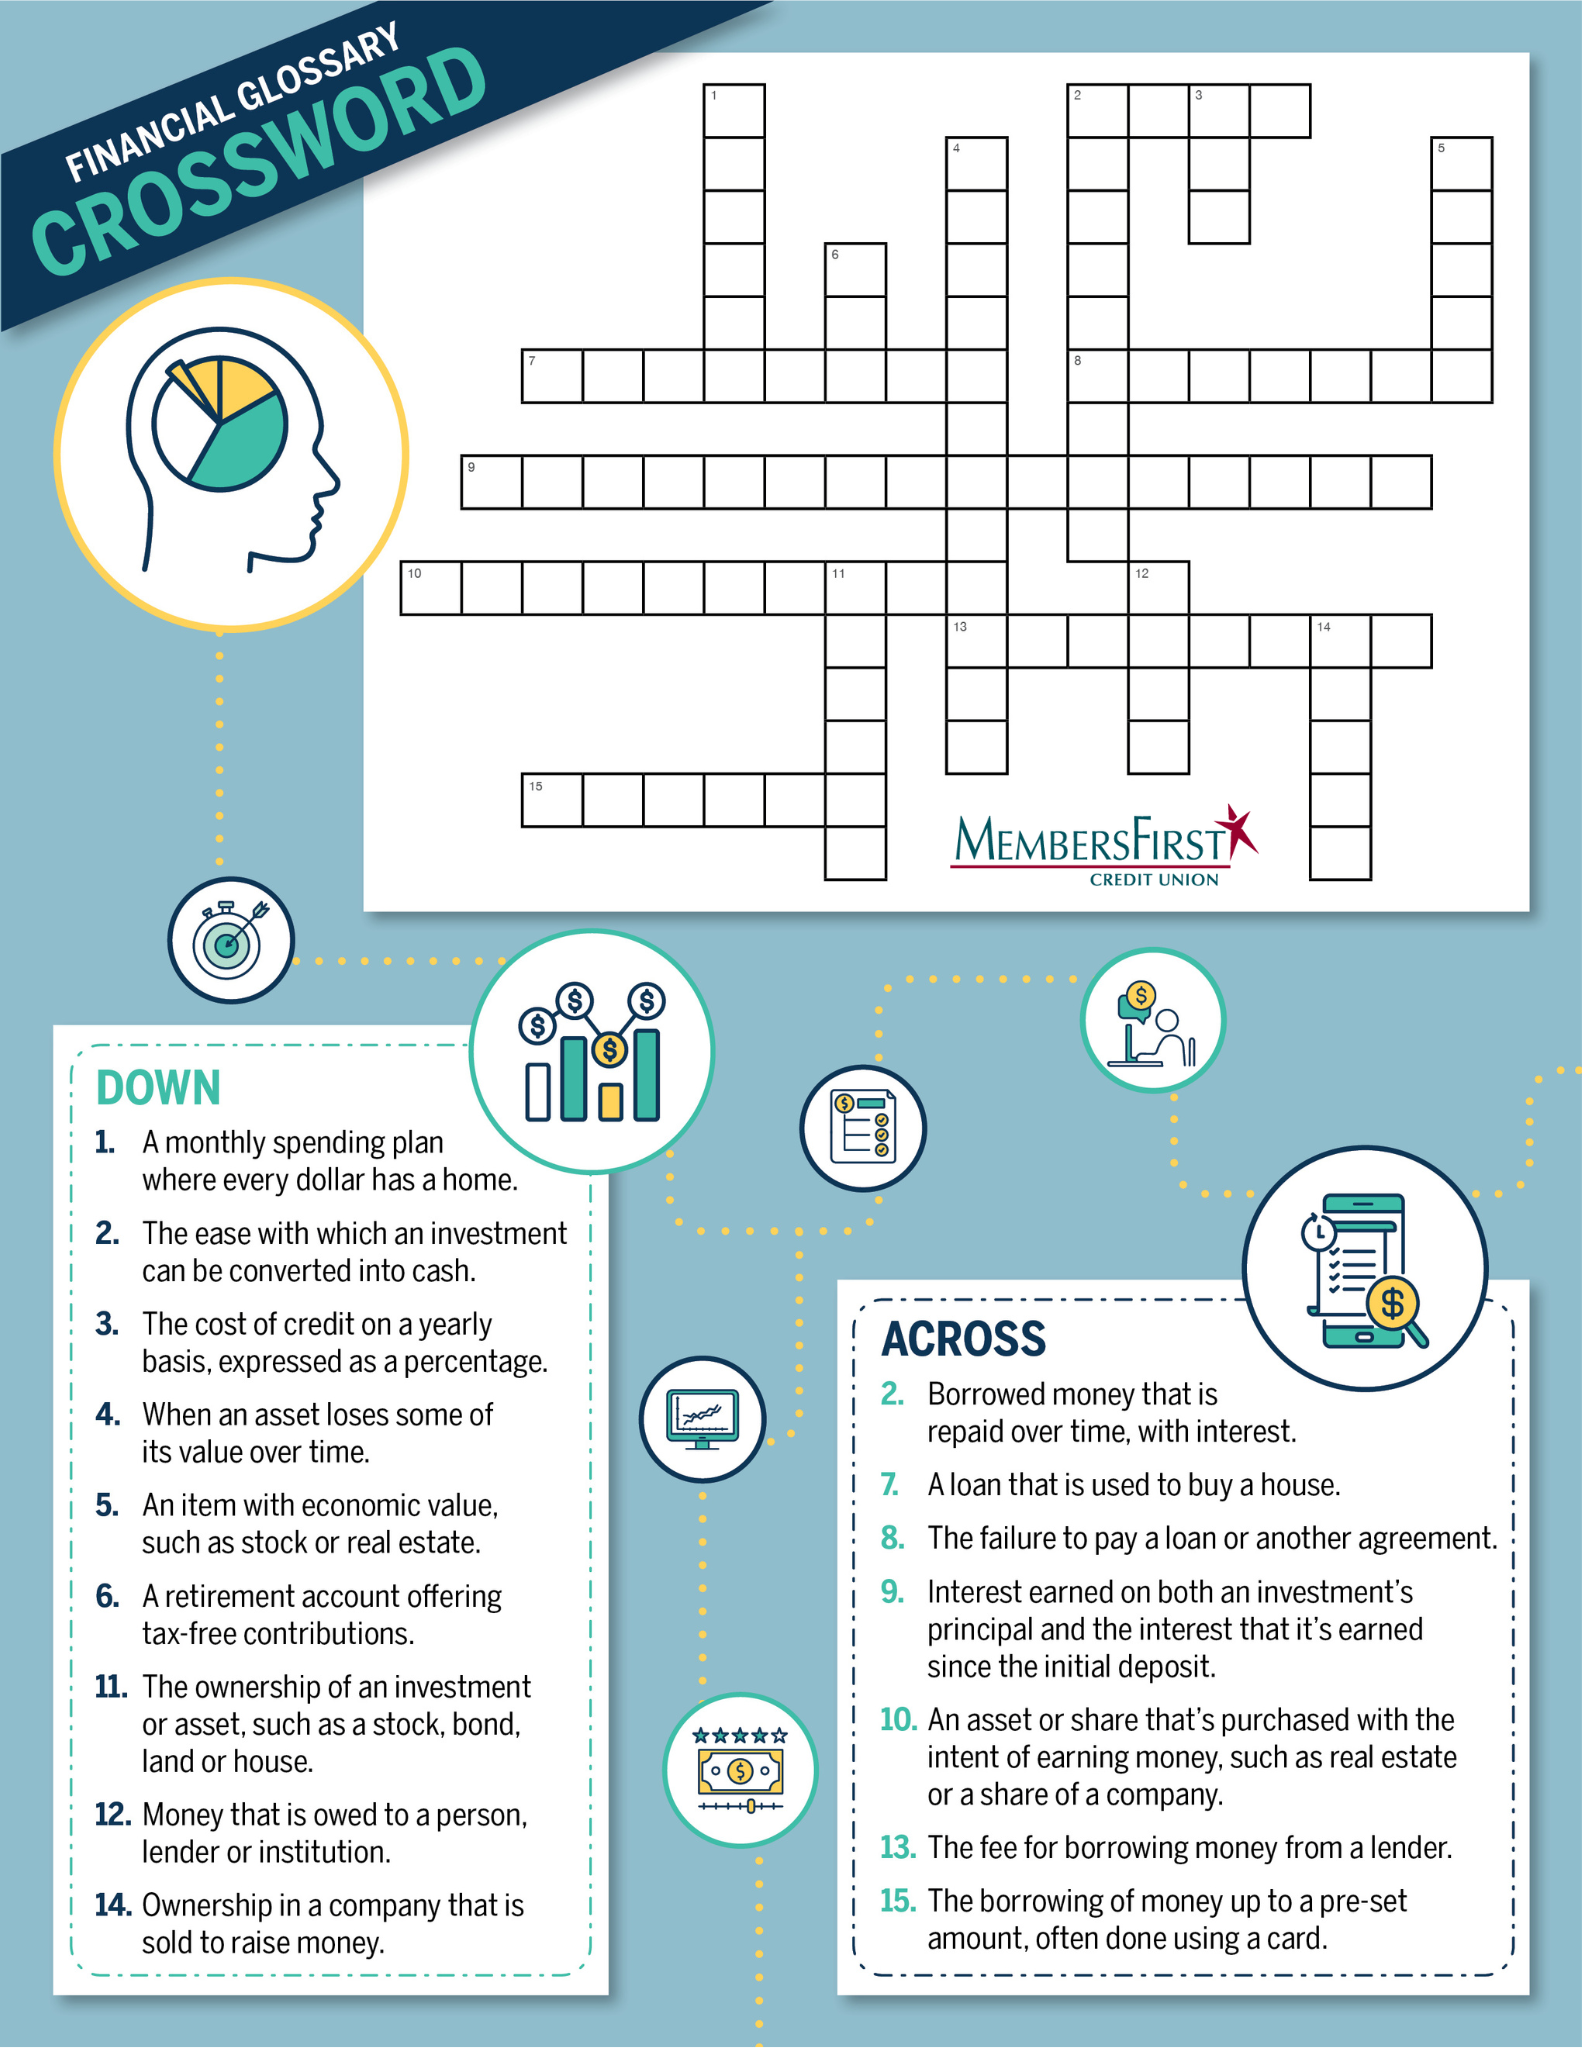 Image of Financial Glossary Crossword